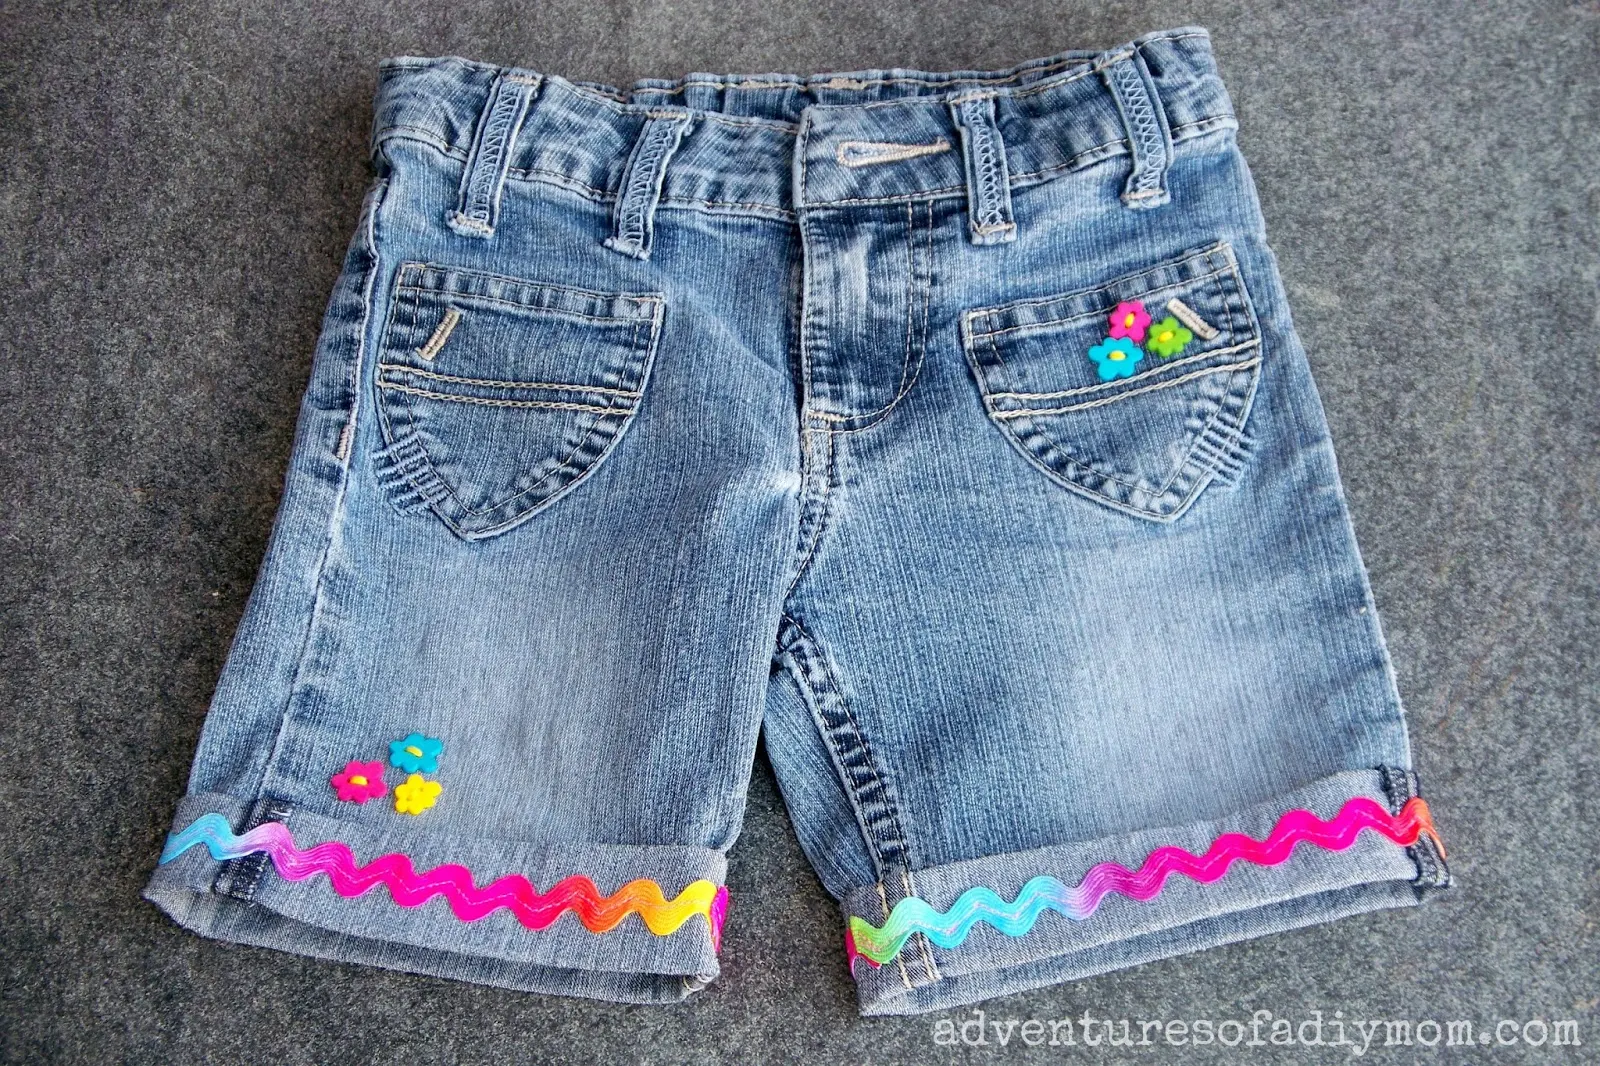 Cuffed Shorts with Ribbon and Buttons - Cut off Jean Shorts Series